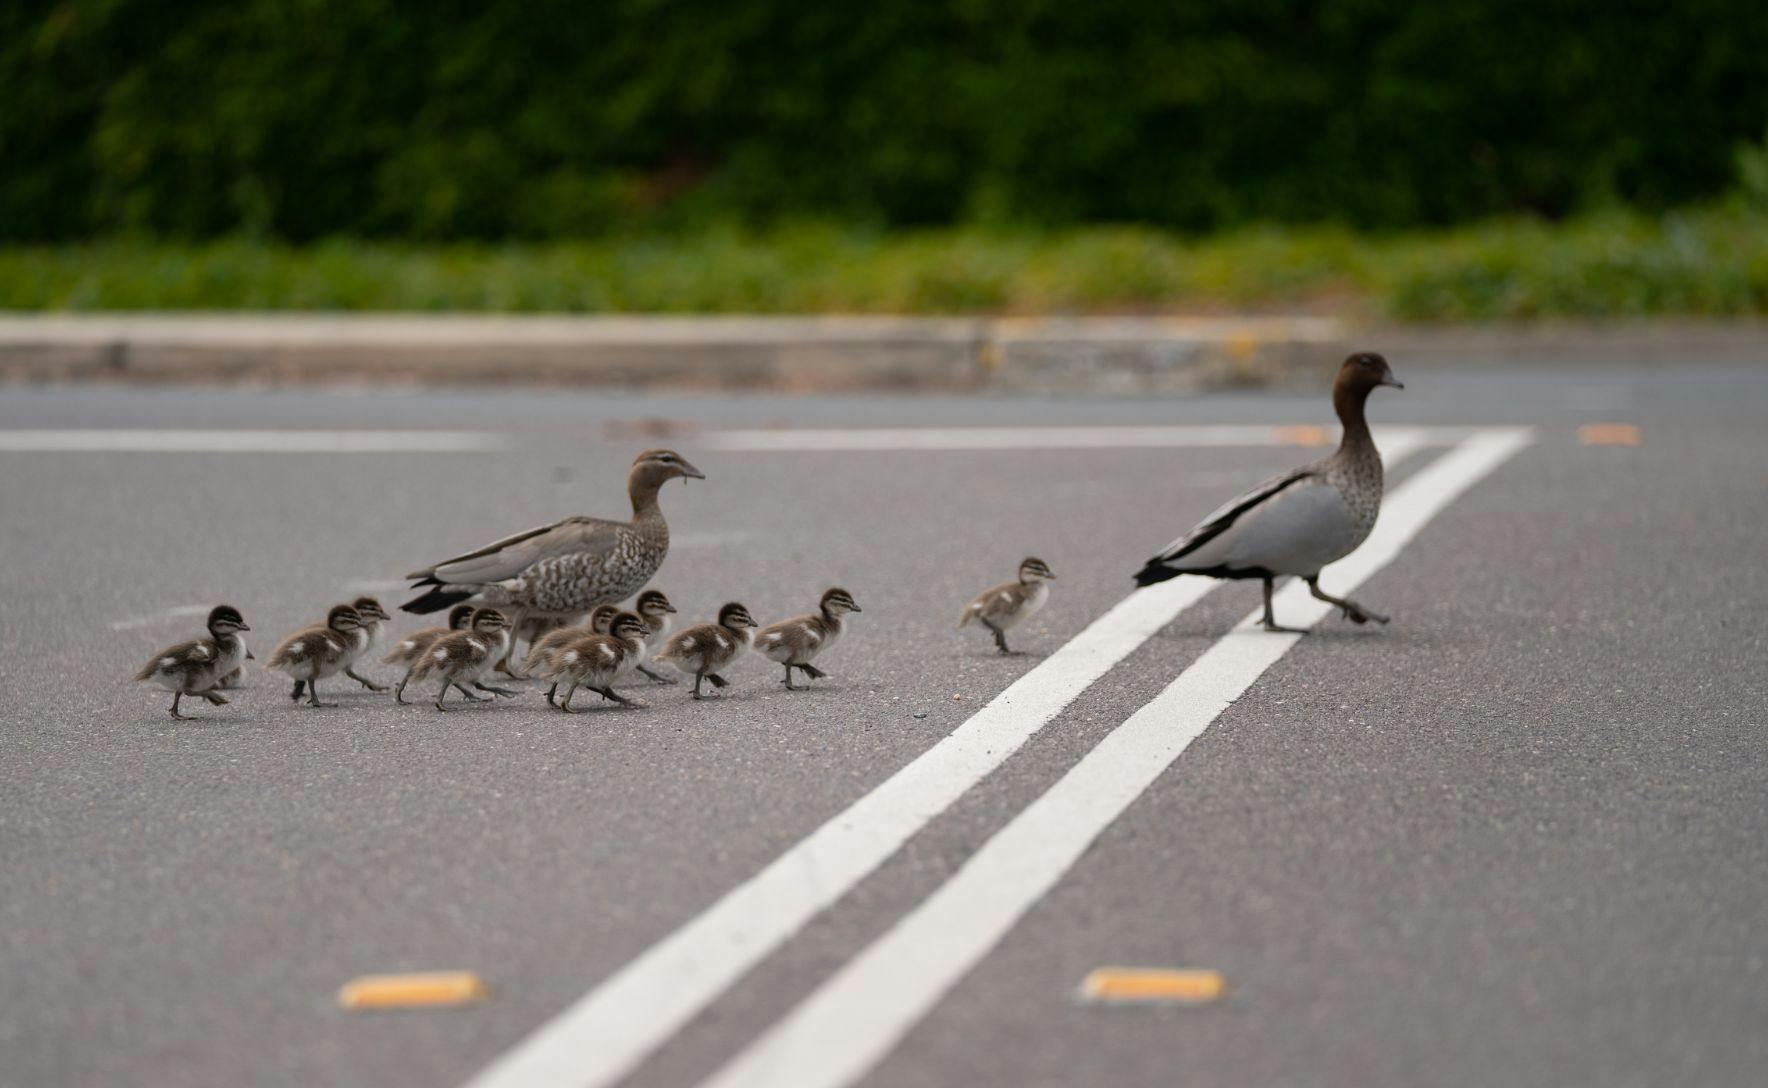 A family of ducks waddling along a road. There are eleven ducklings and two ducks.